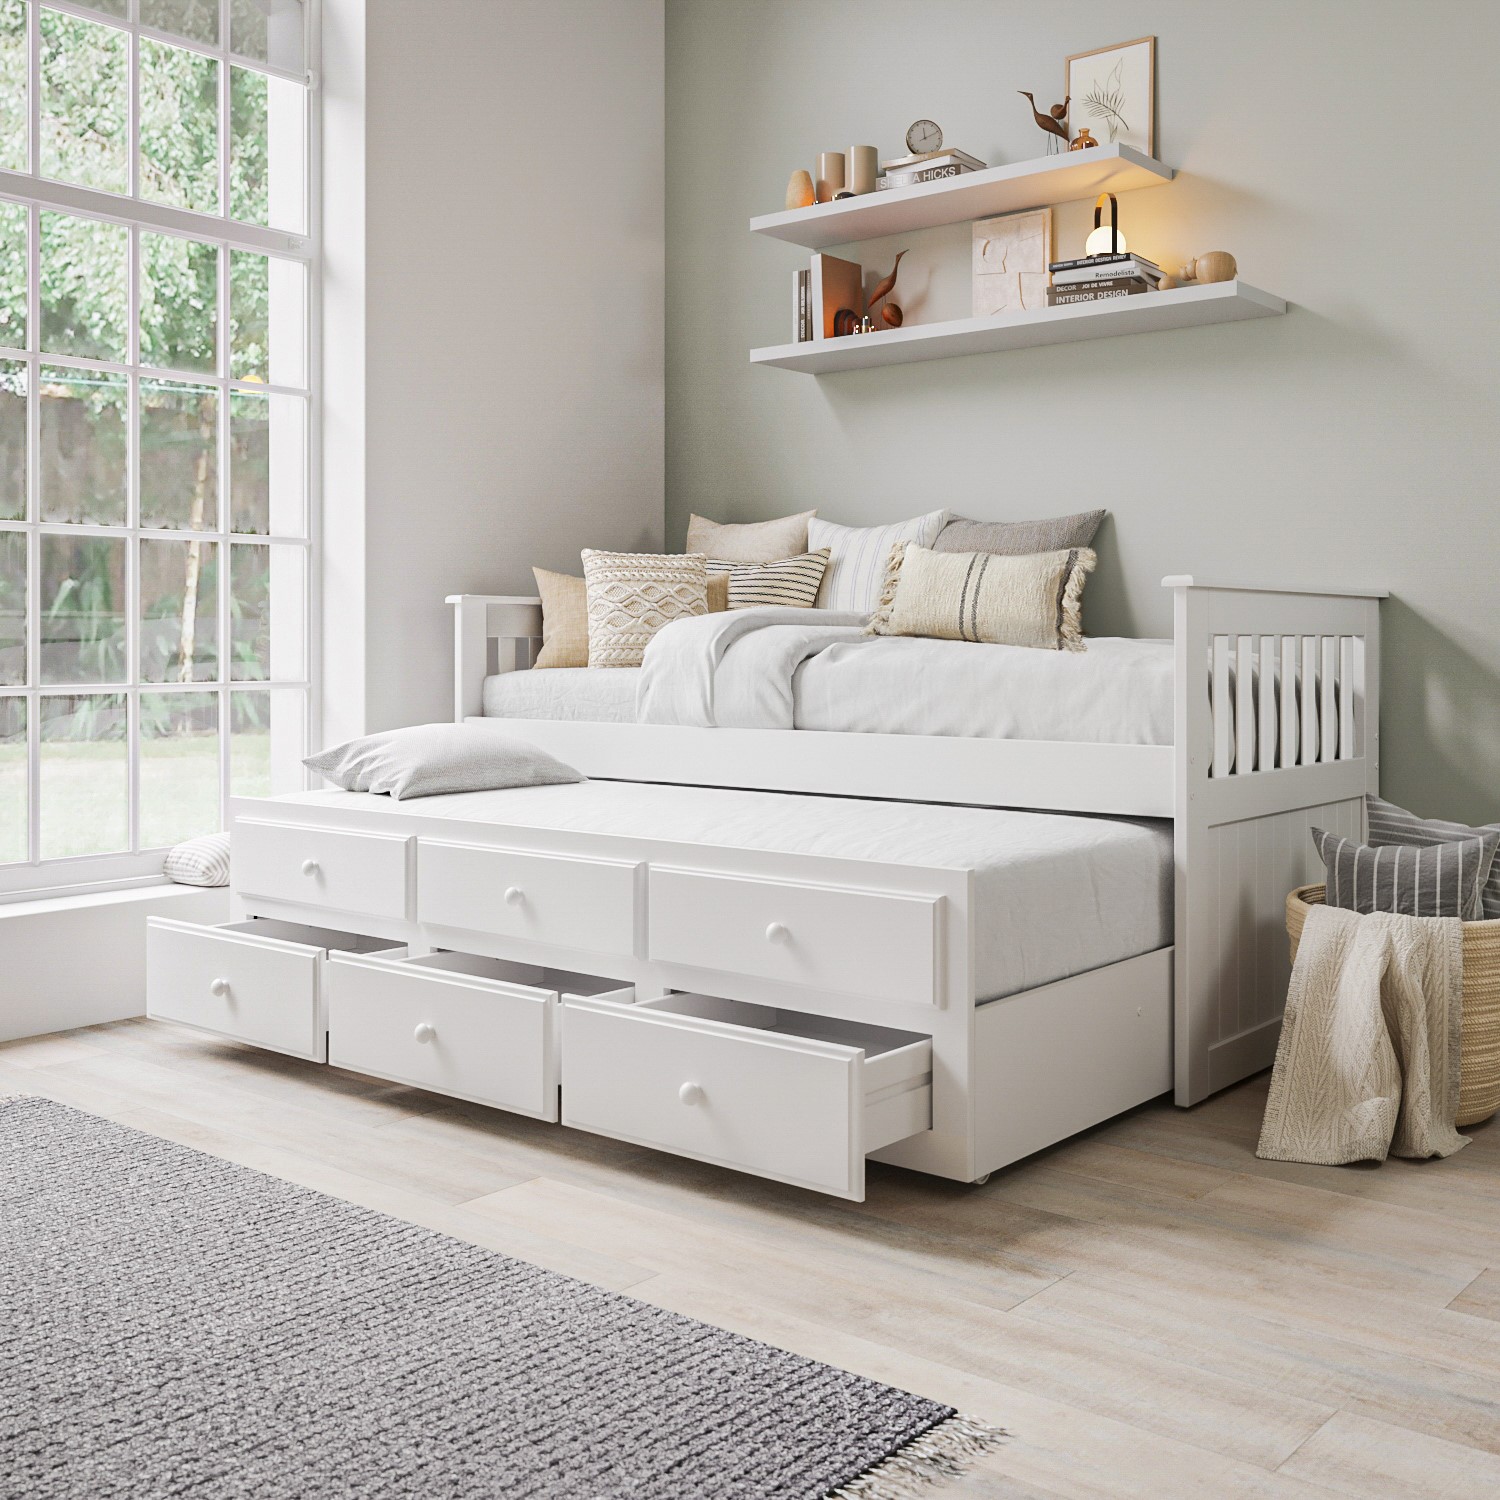 White Single Wooden Guest Bed with Storage Drawers and Trundle - Oxford OXF007B 5056096000566.0